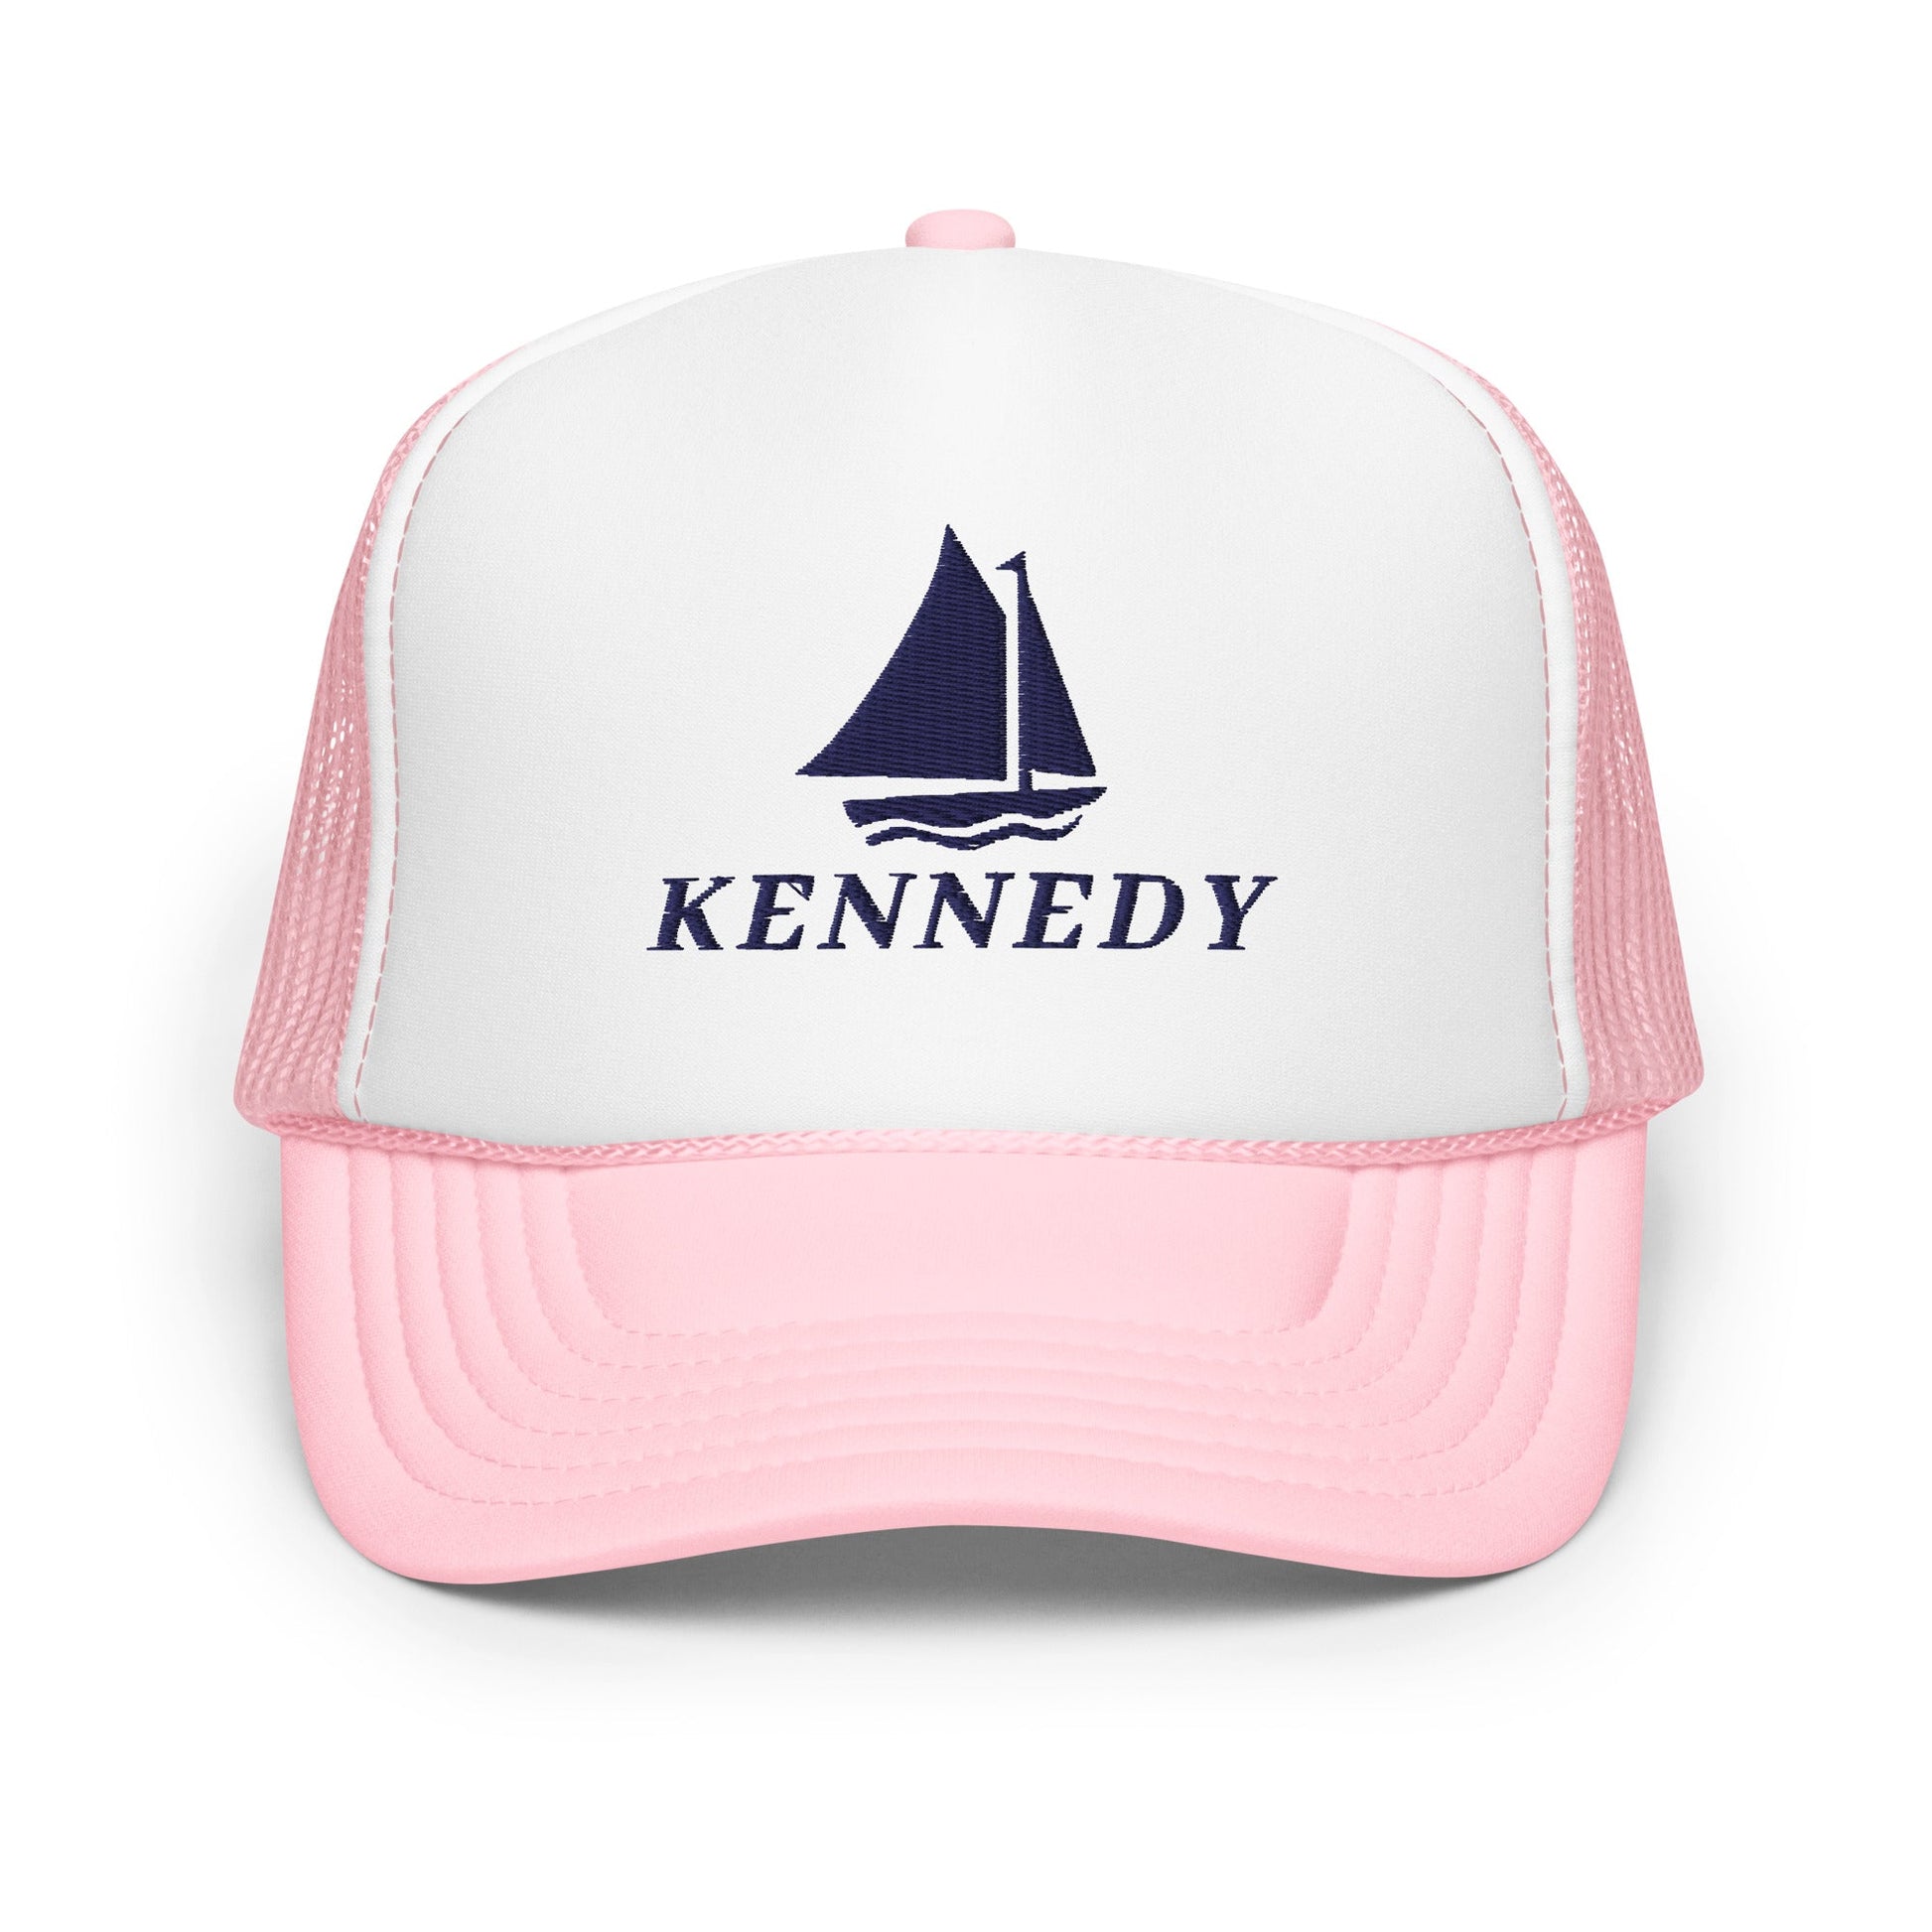 The Resolute Foam Trucker Hat - TEAM KENNEDY. All rights reserved